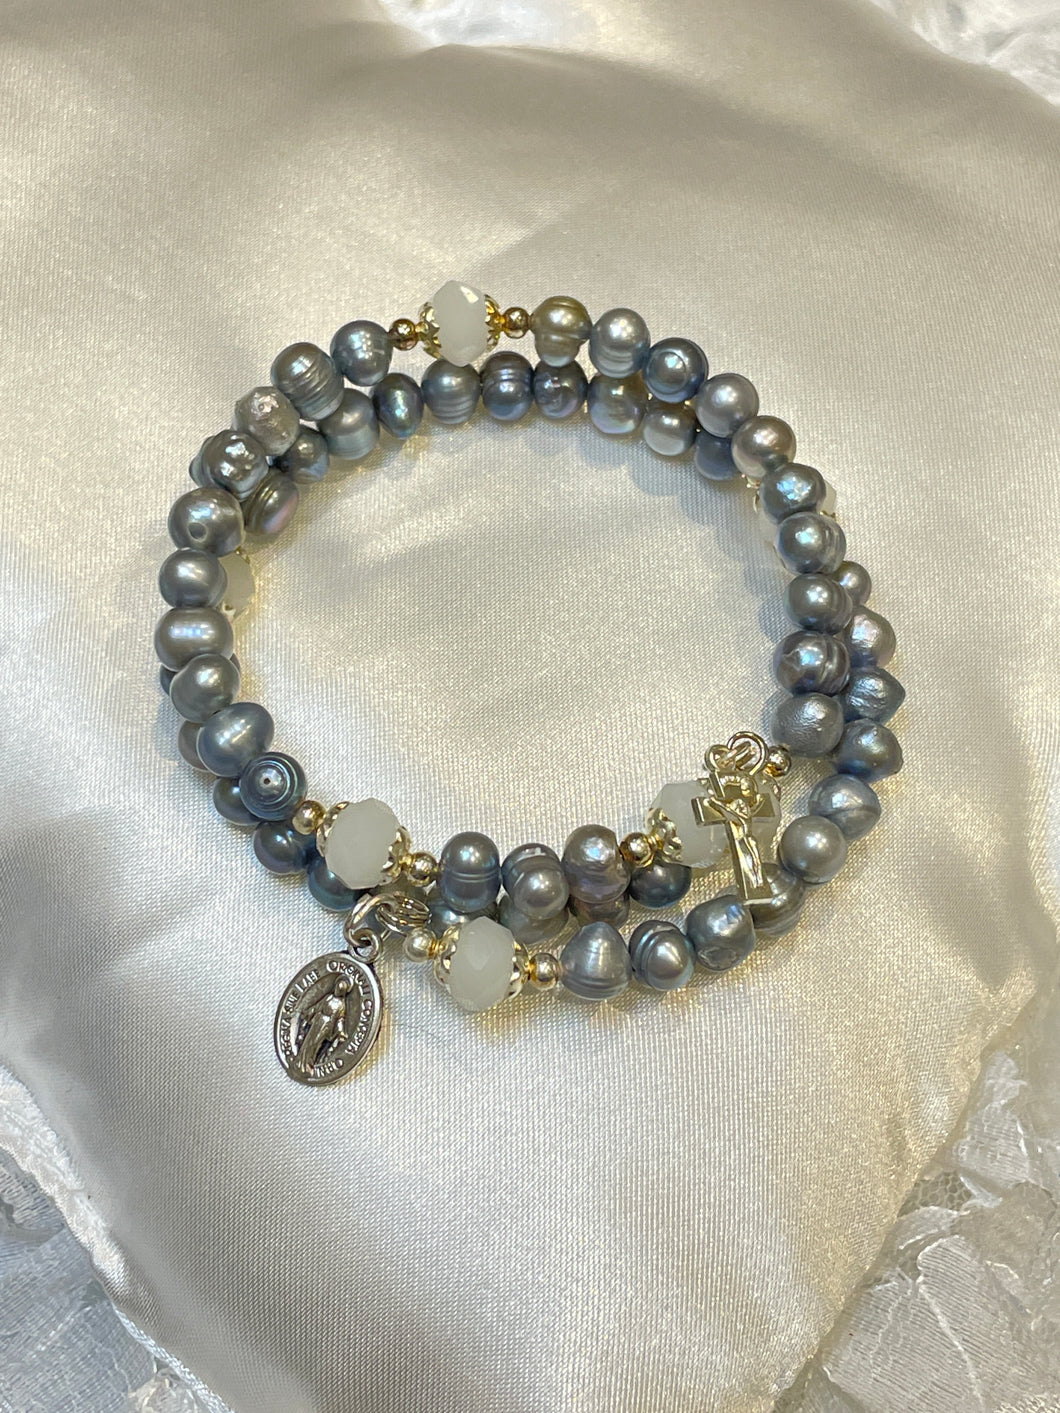 Blue Gray Peal Rosary Bracelet with Miraculous Medal and Crucifix Charms